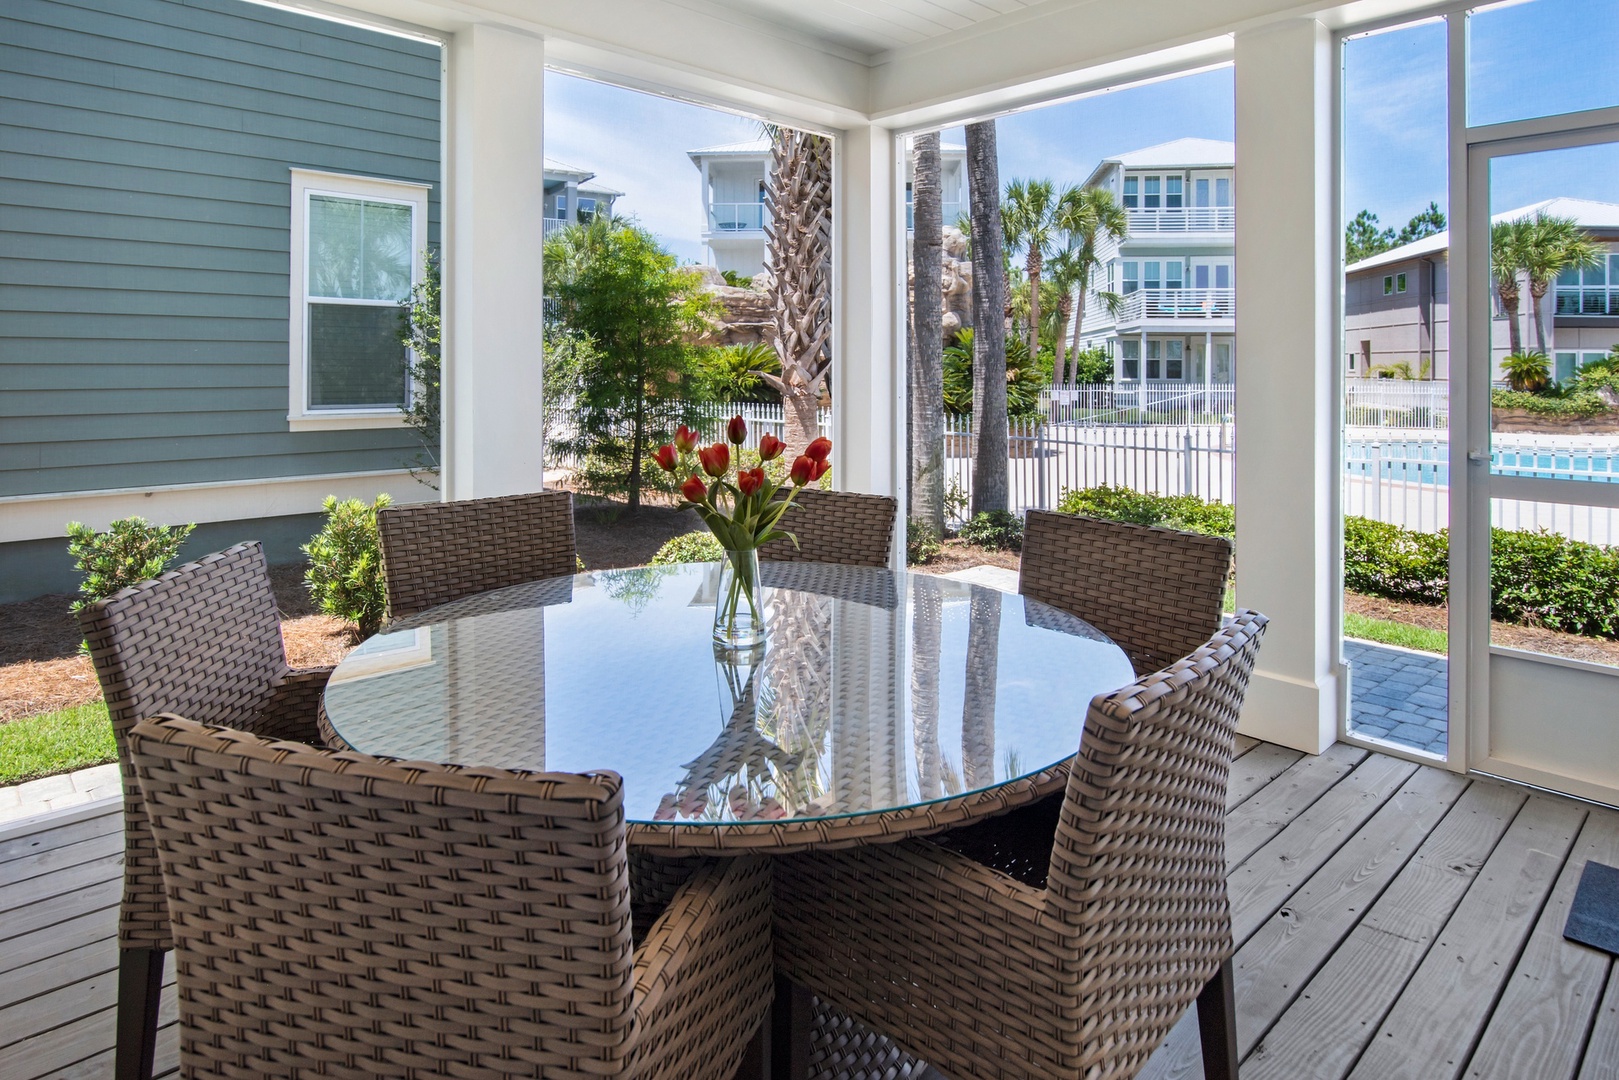 Enjoy meals out in the breezy screened porch with pool views!